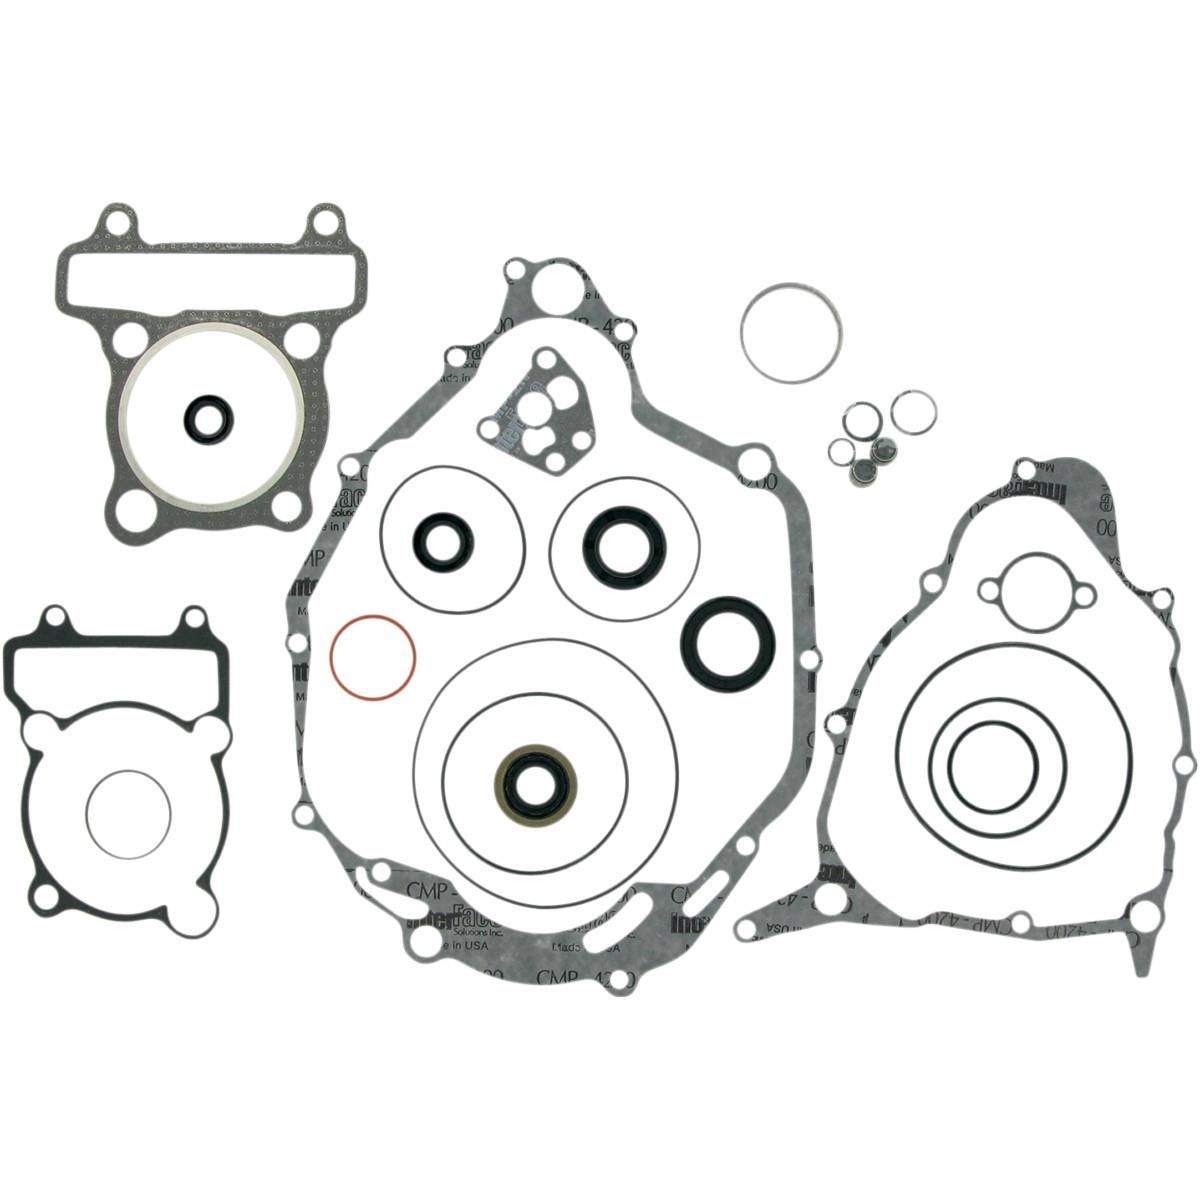 13E1-MOOSE-RACIN-09340634 Complete Gasket Kit with Oil Seals